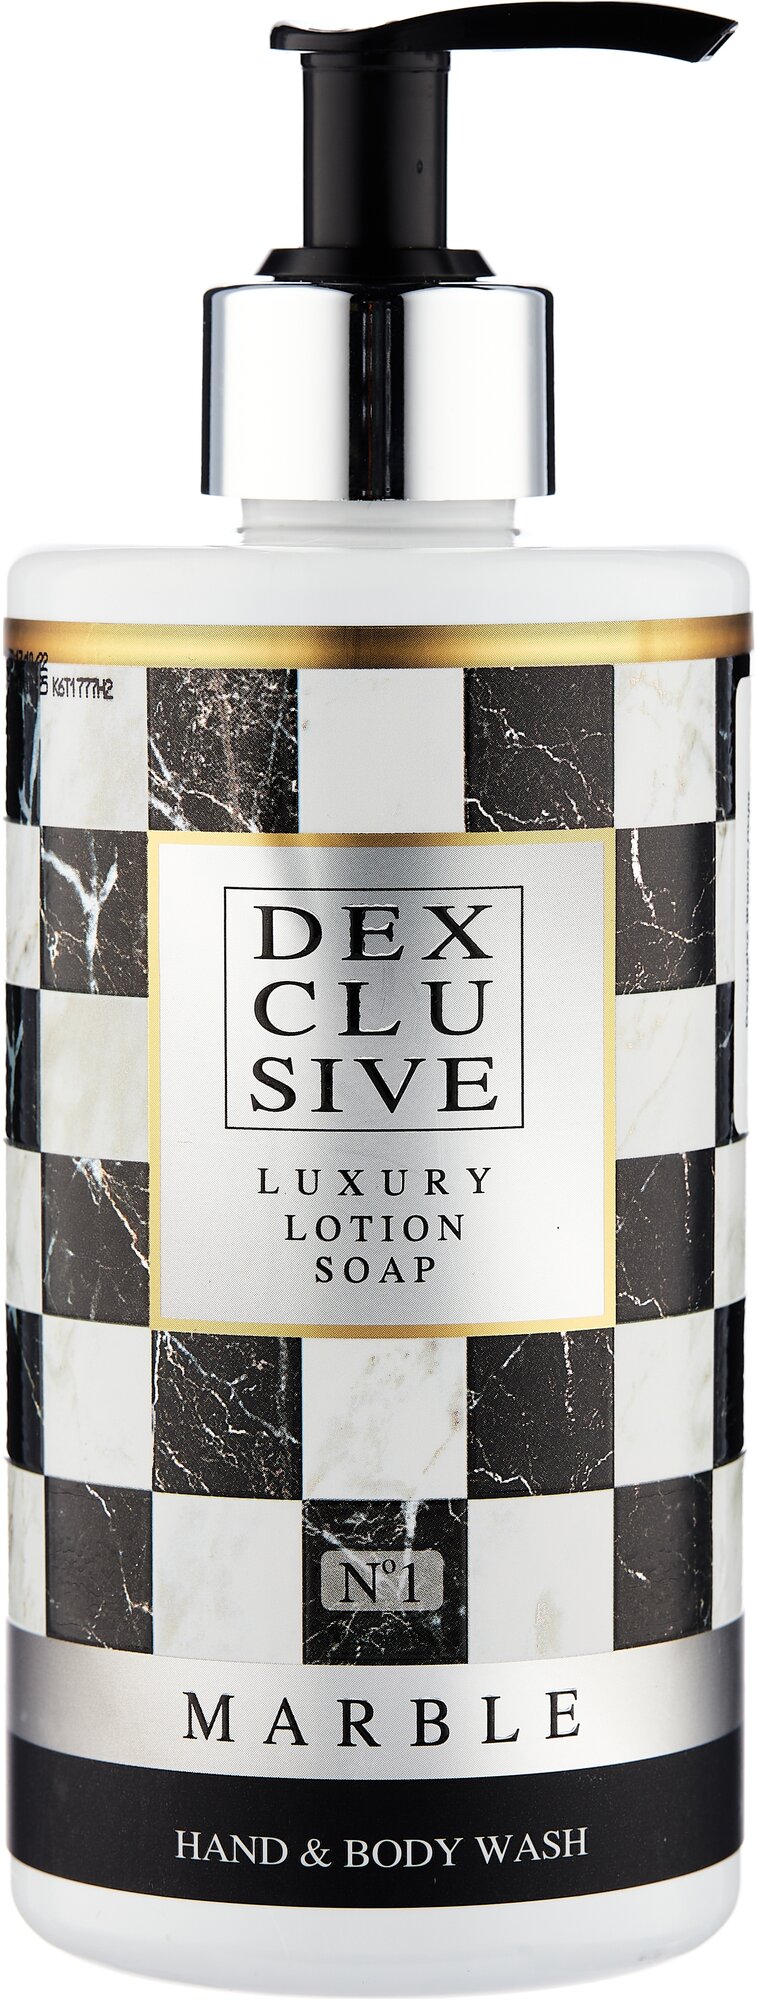 DexClusive Мыло жидкое Marble Luxury Lotion Soap Hand & Body Wash №1, 400 мл